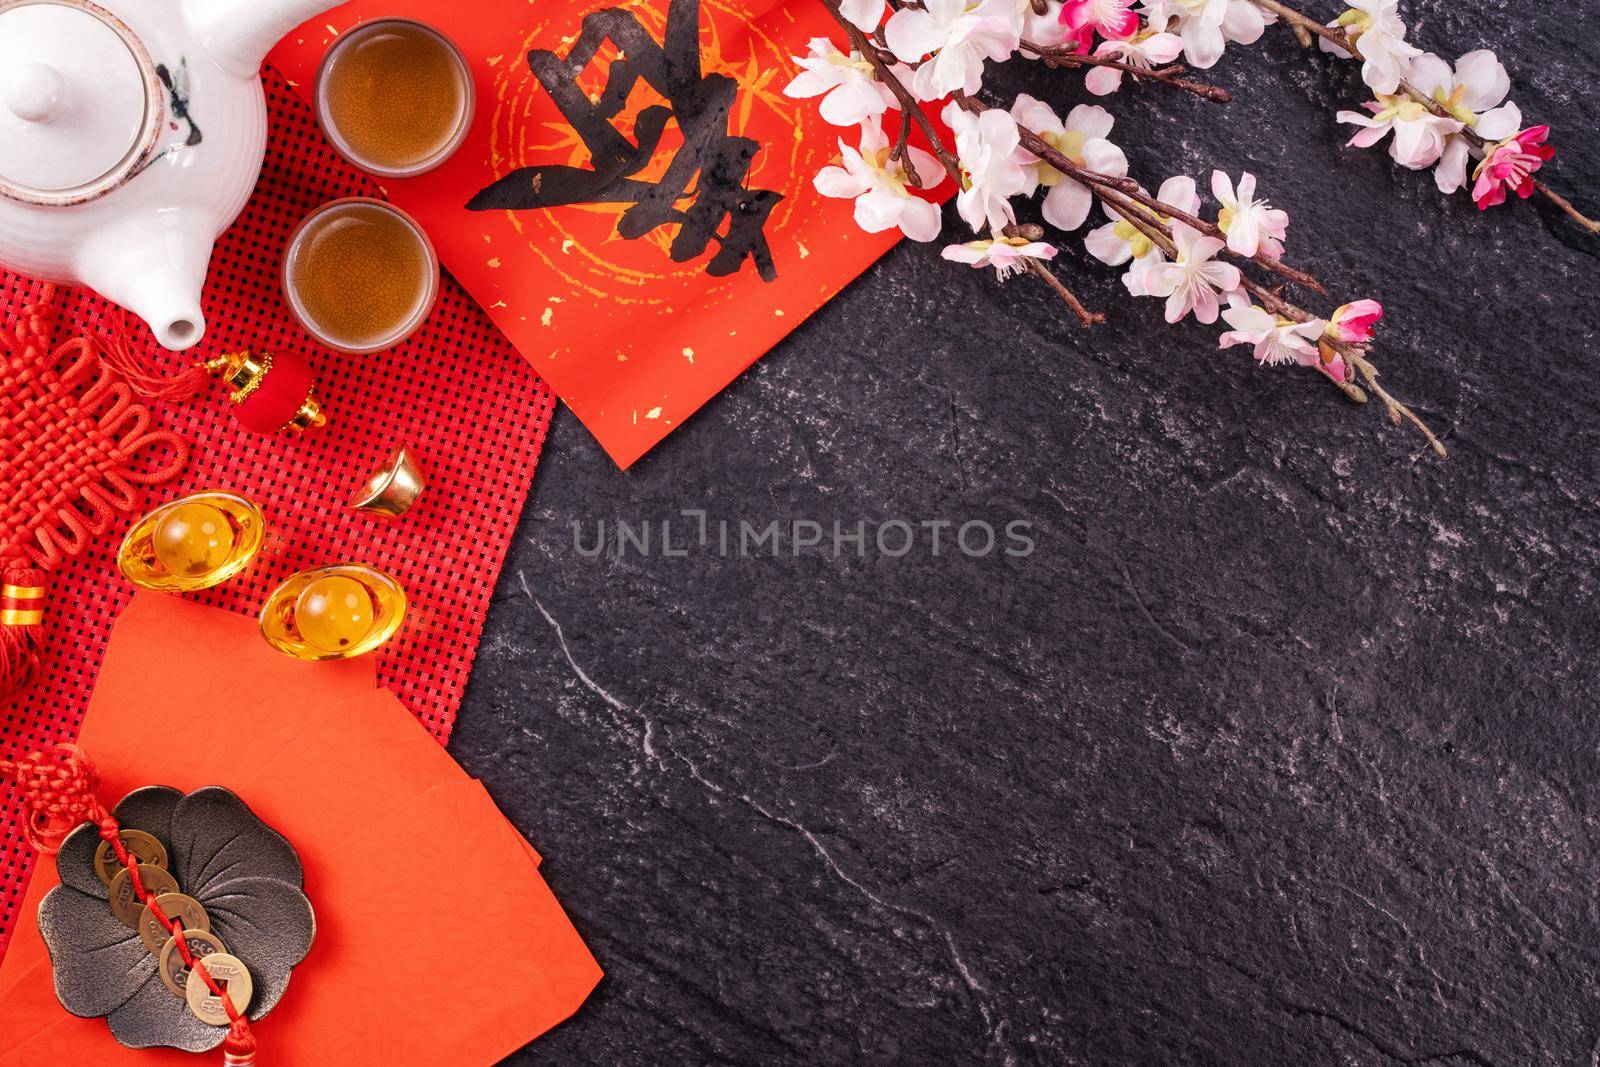 Design concept of Chinese lunar January new year - Festive accessories, red envelopes (ang pow, hong bao), top view, flat lay, overhead above. The word 'chun' means coming spring. by ROMIXIMAGE